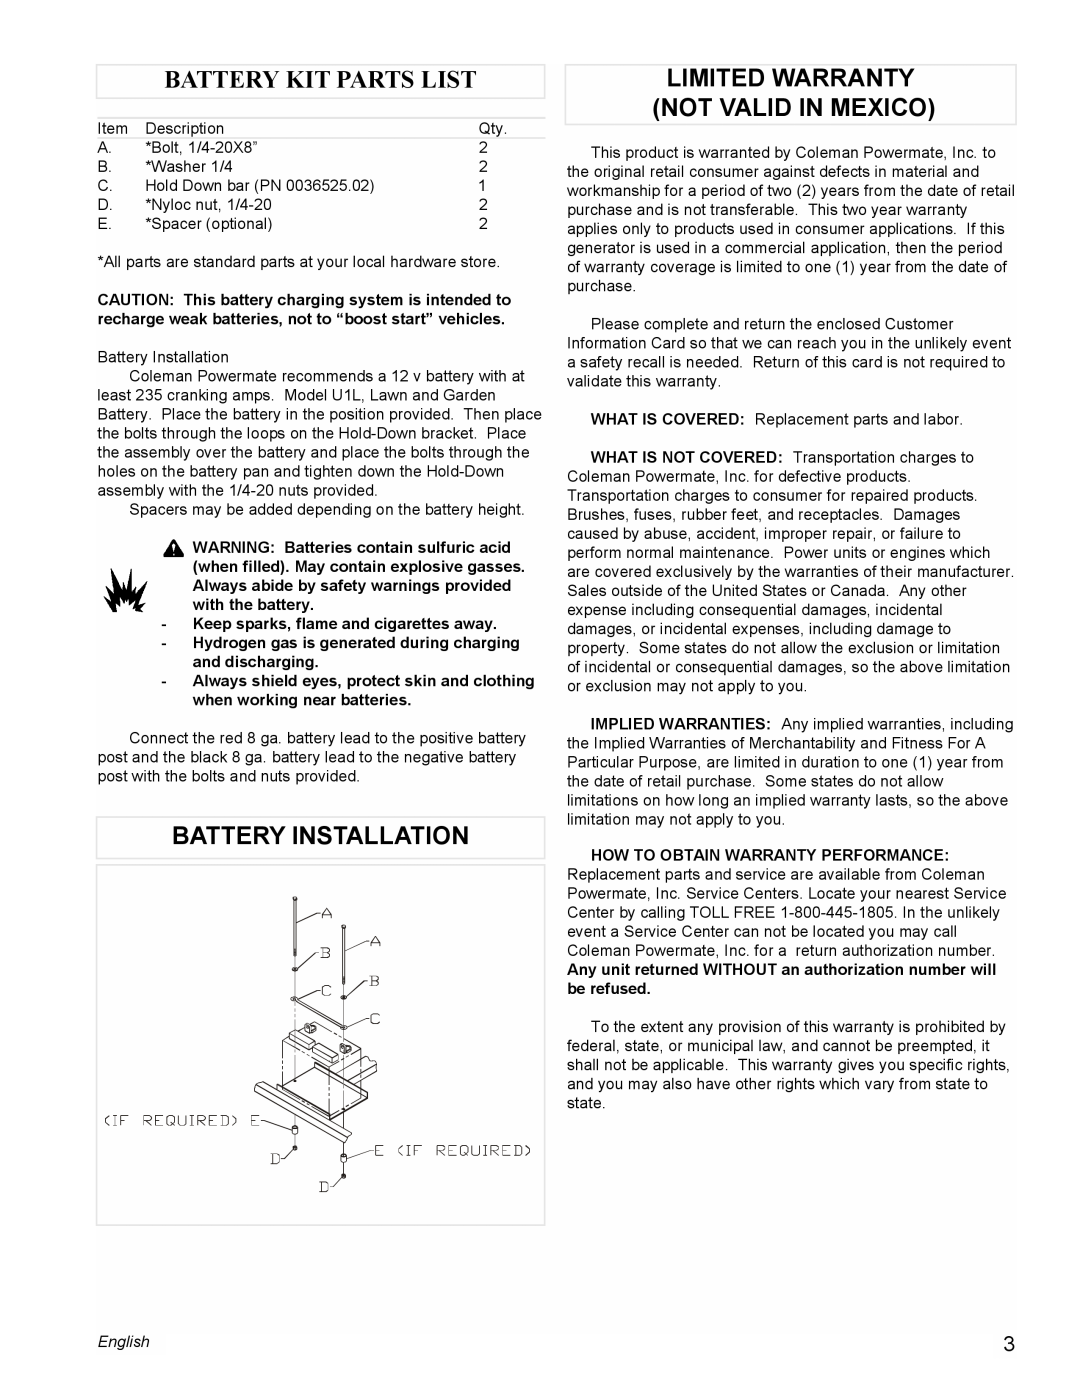 Powermate PMA505622 manual Battery Installation, Battery Kit Parts List, Limited Warranty Not Valid In Mexico, English 